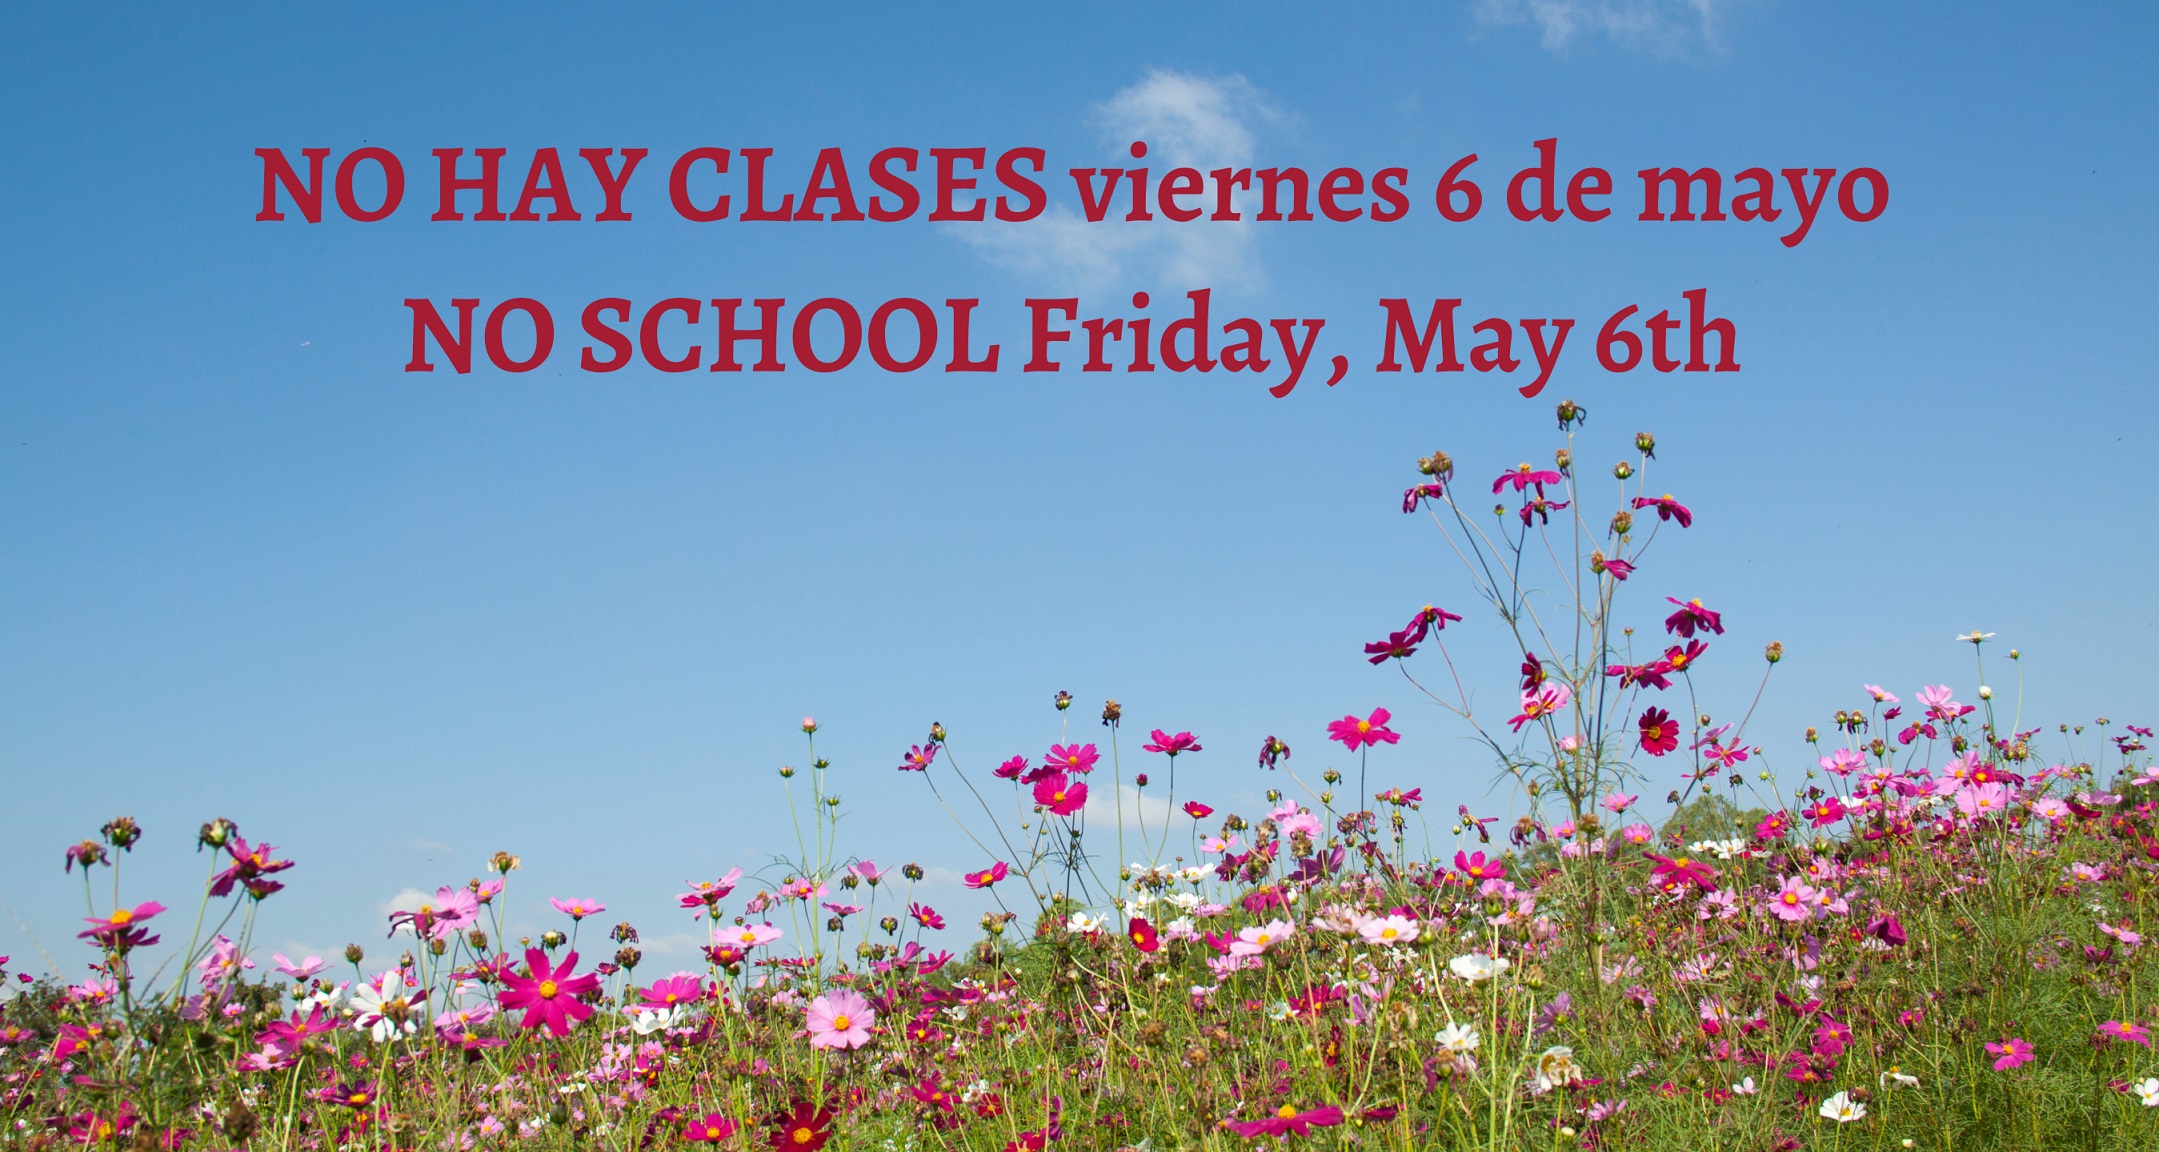 Red text on a background of blue sky above grass and flowers. Text says, "NO SCHOOL Friday, May 6" and "NO HAY CLASES viernes 6 de mayo."